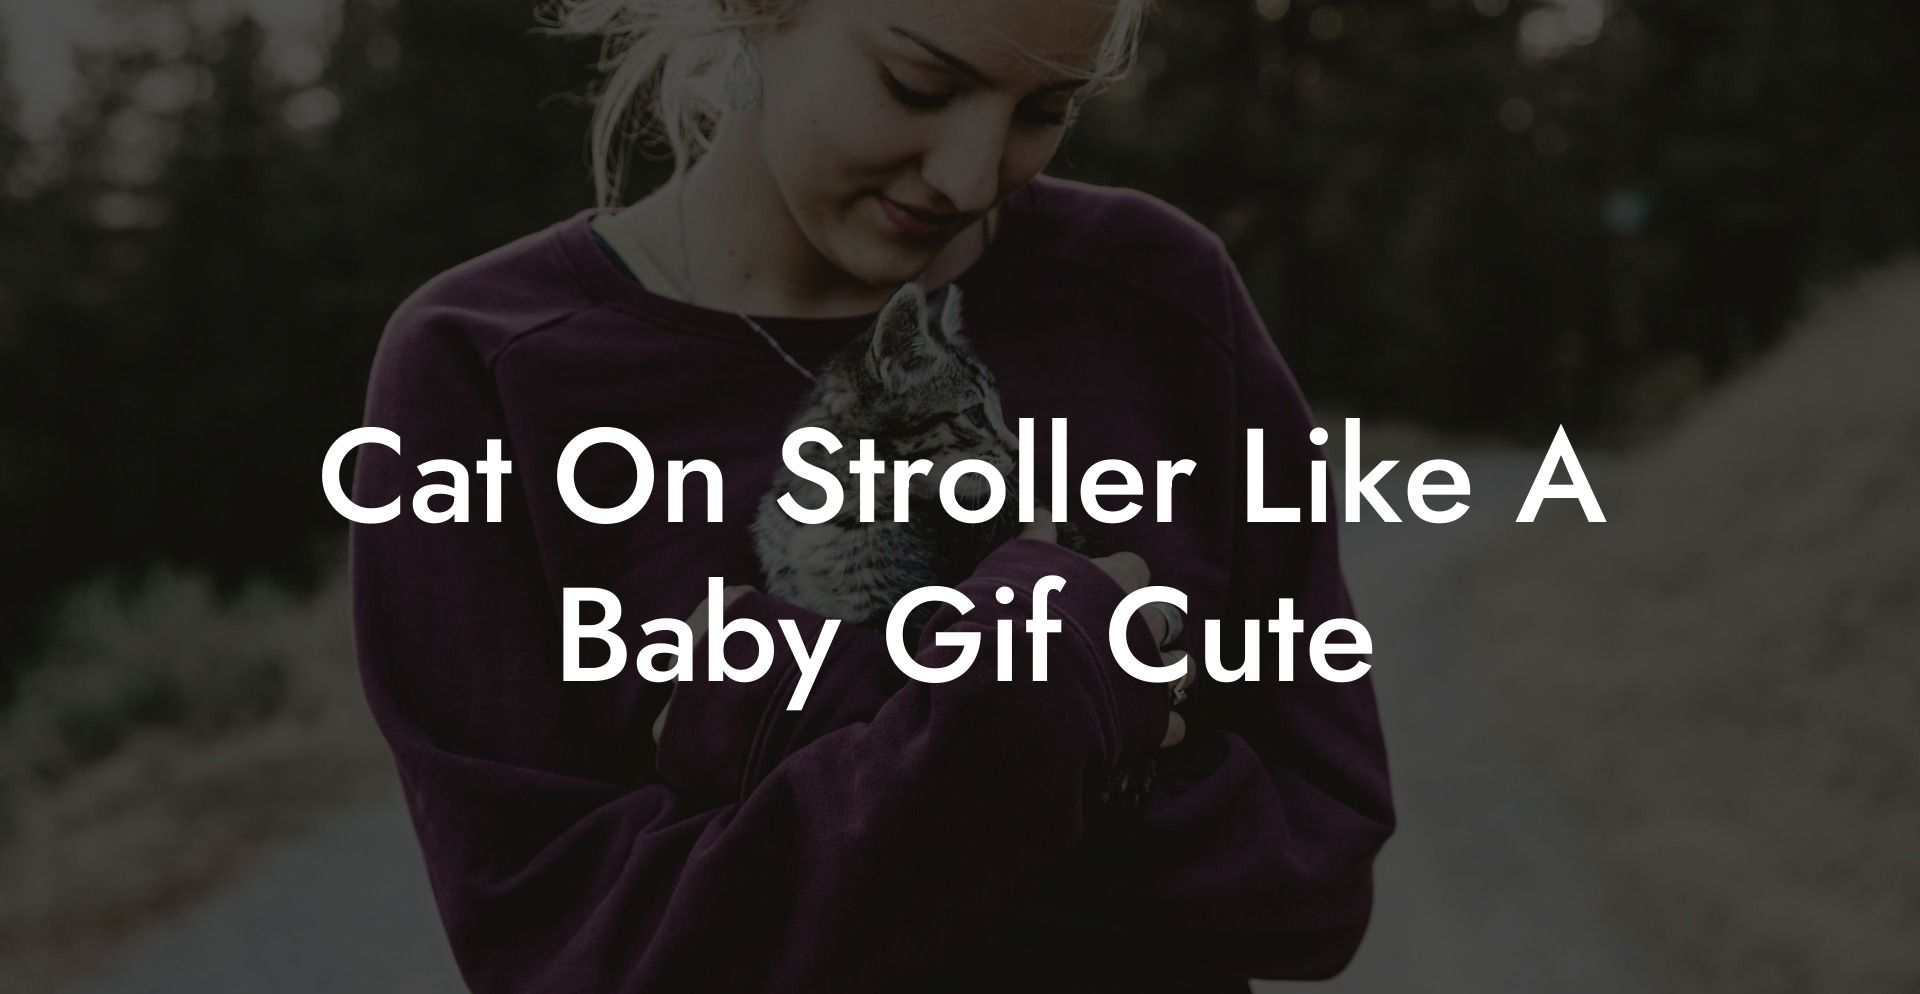 Cat On Stroller Like A Baby Gif Cute